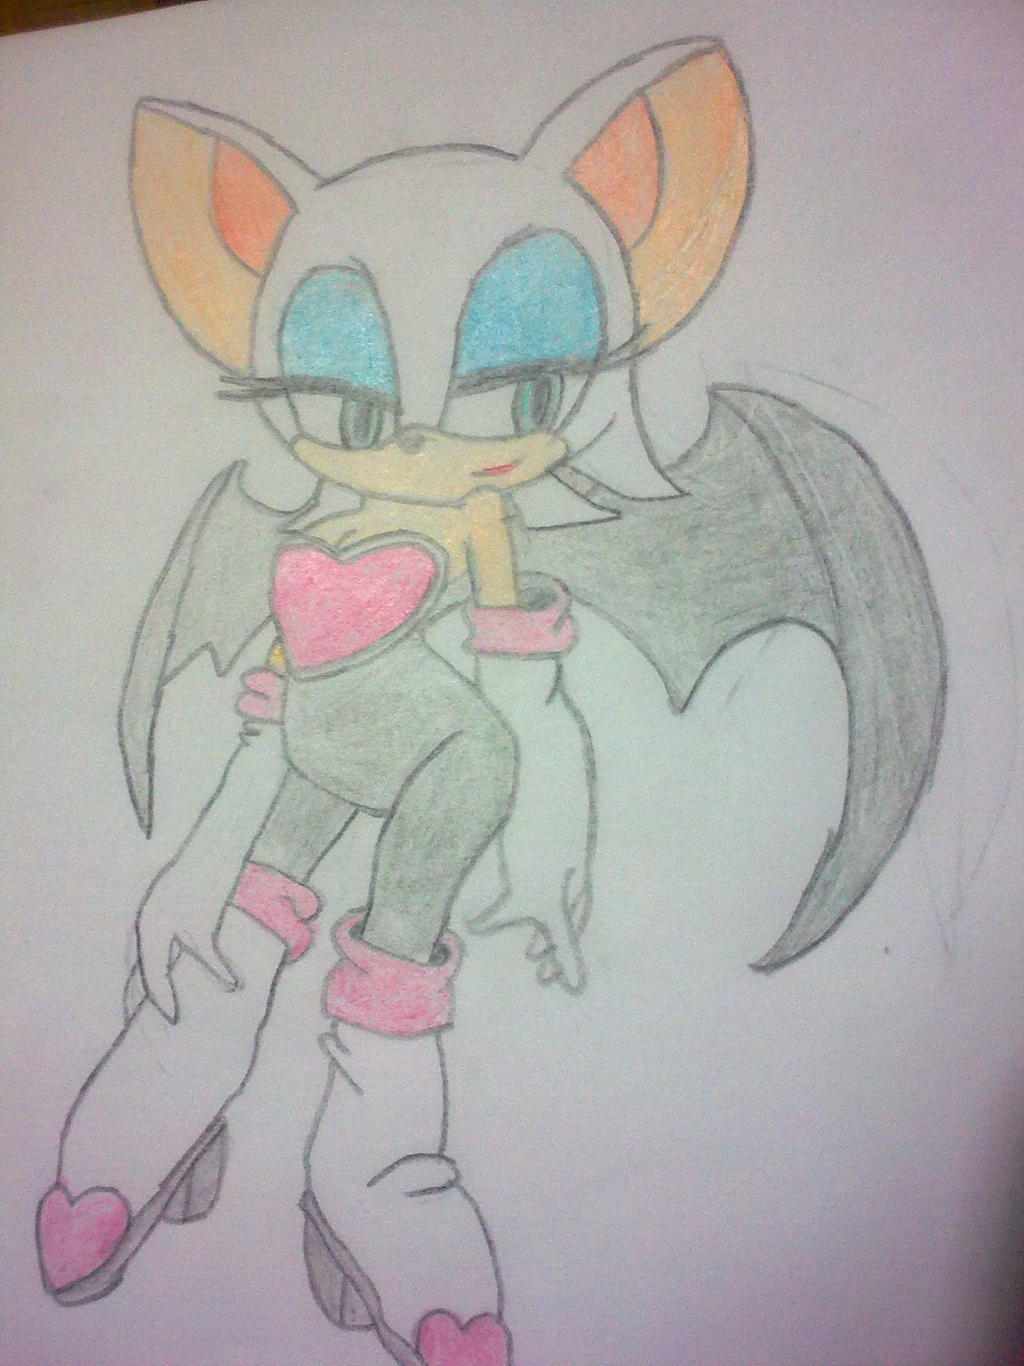 rouge_the_bat_drawing_by_eizzoux-d6porl5.jpg